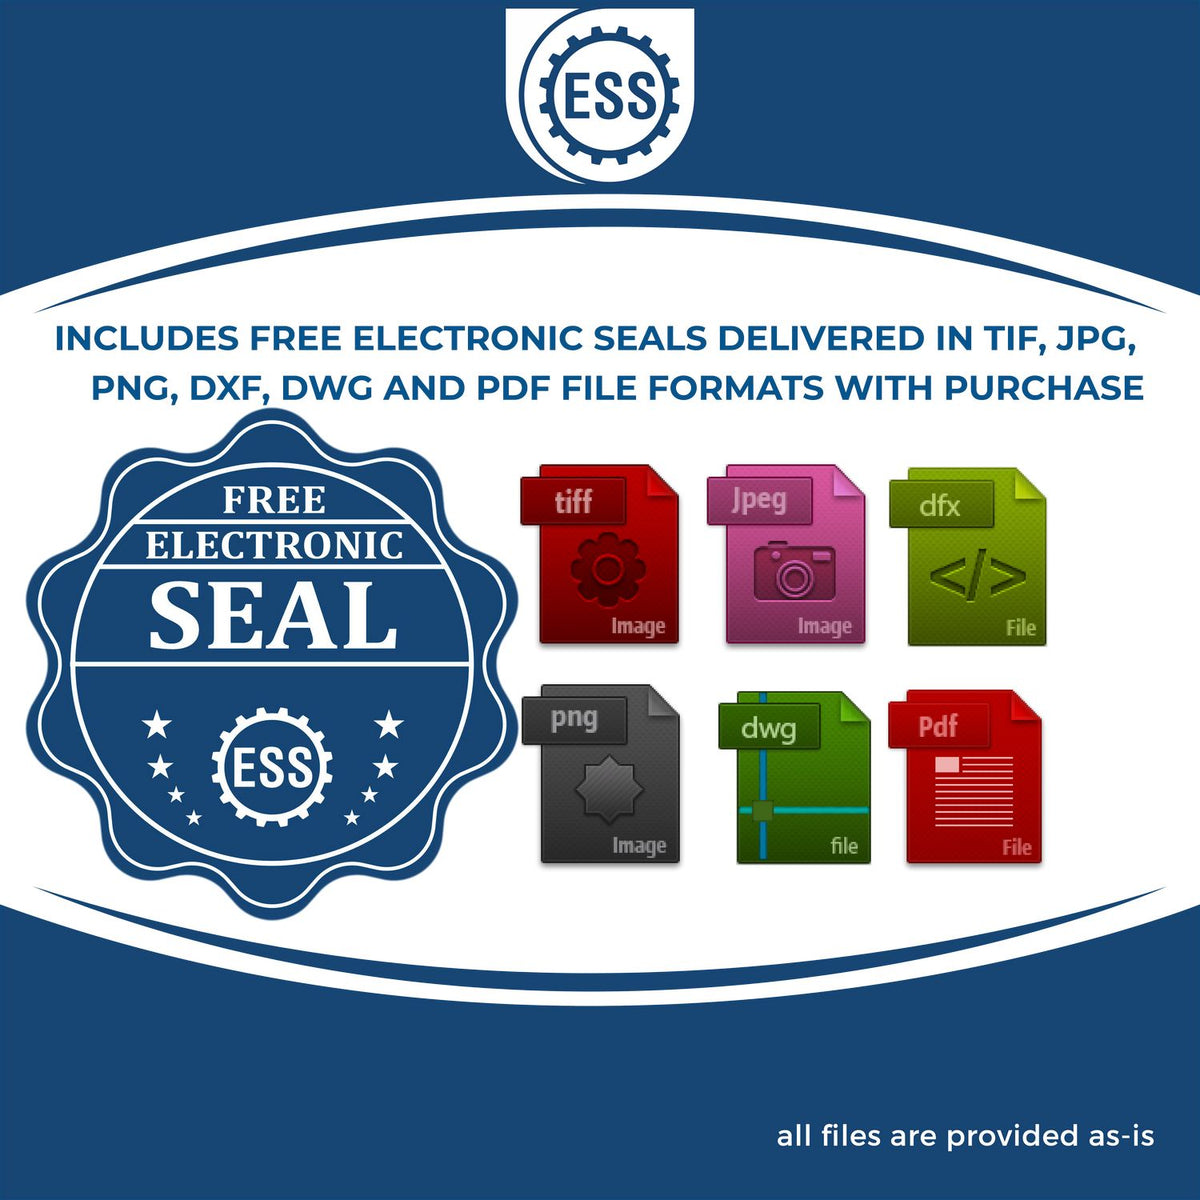 An infographic for the free electronic seal for the Slim Pre-Inked Guam Professional Geologist Seal Stamp illustrating the different file type icons such as DXF, DWG, TIF, JPG and PNG.